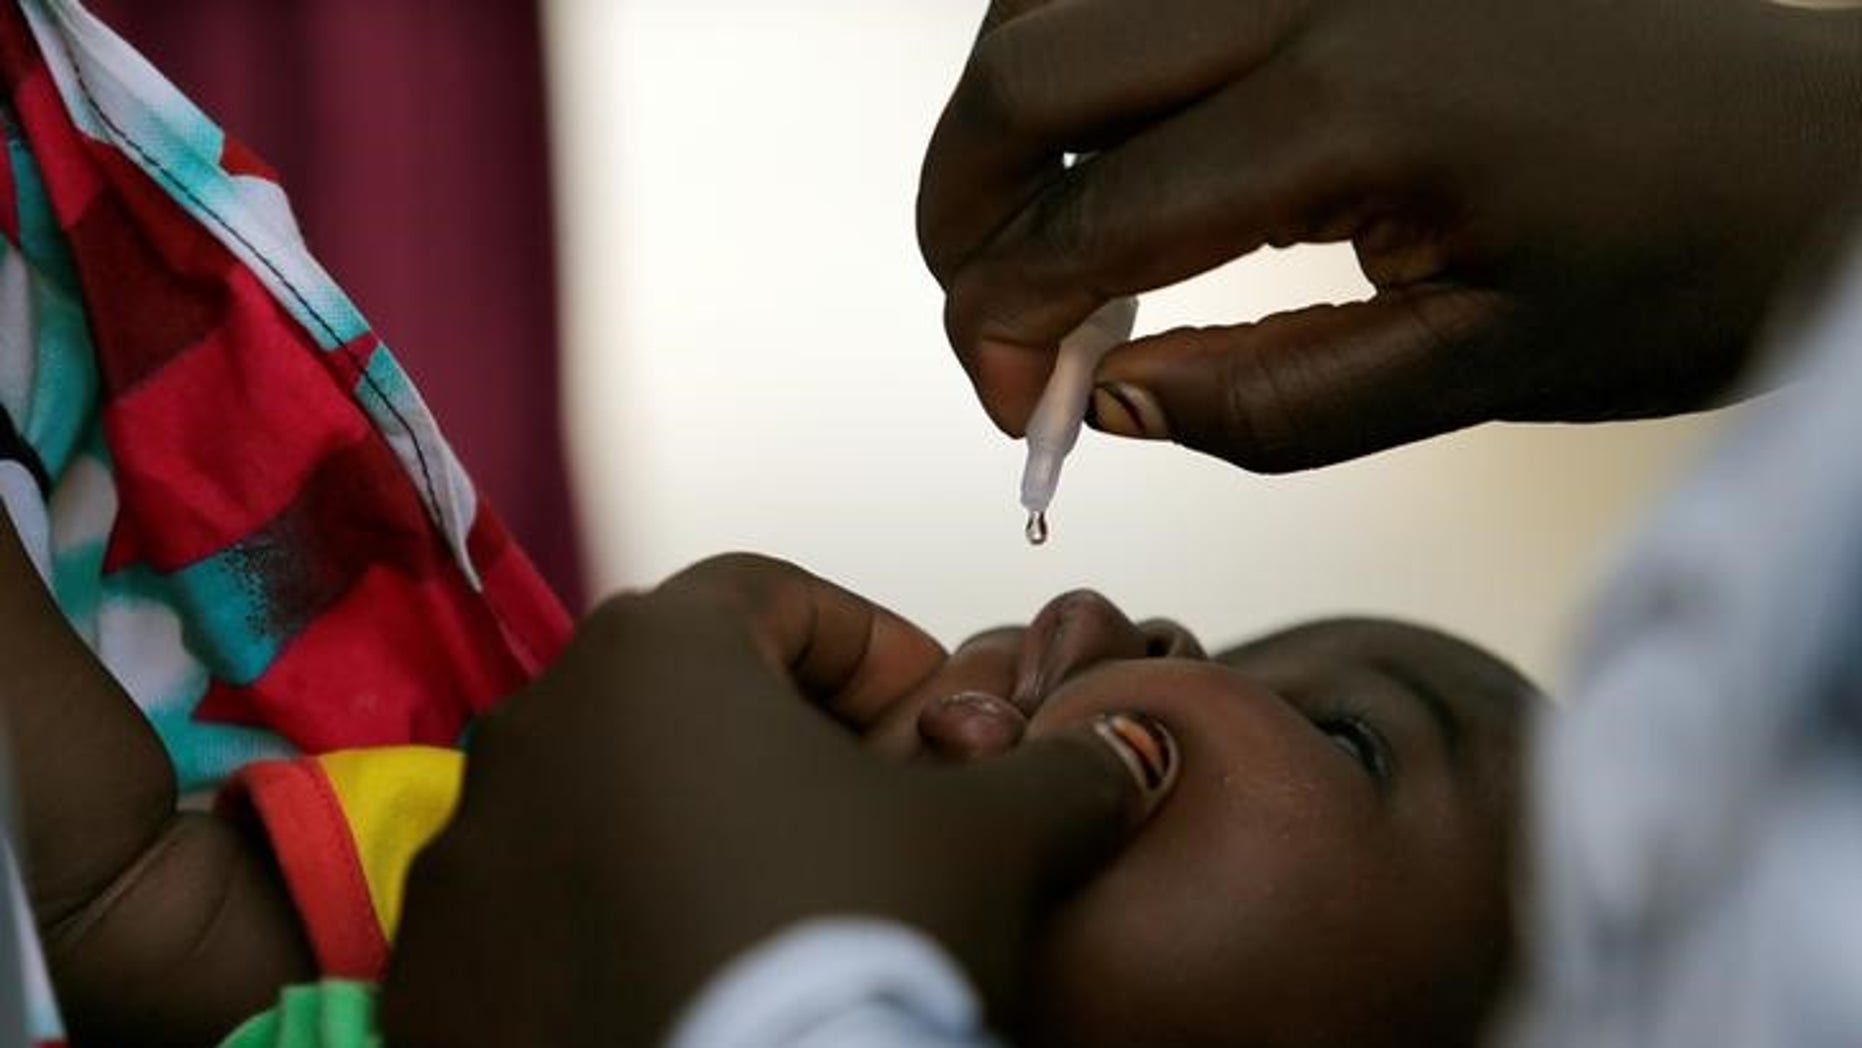 Polio vaccine makers failing to make enough doses: WHO experts | Fox News